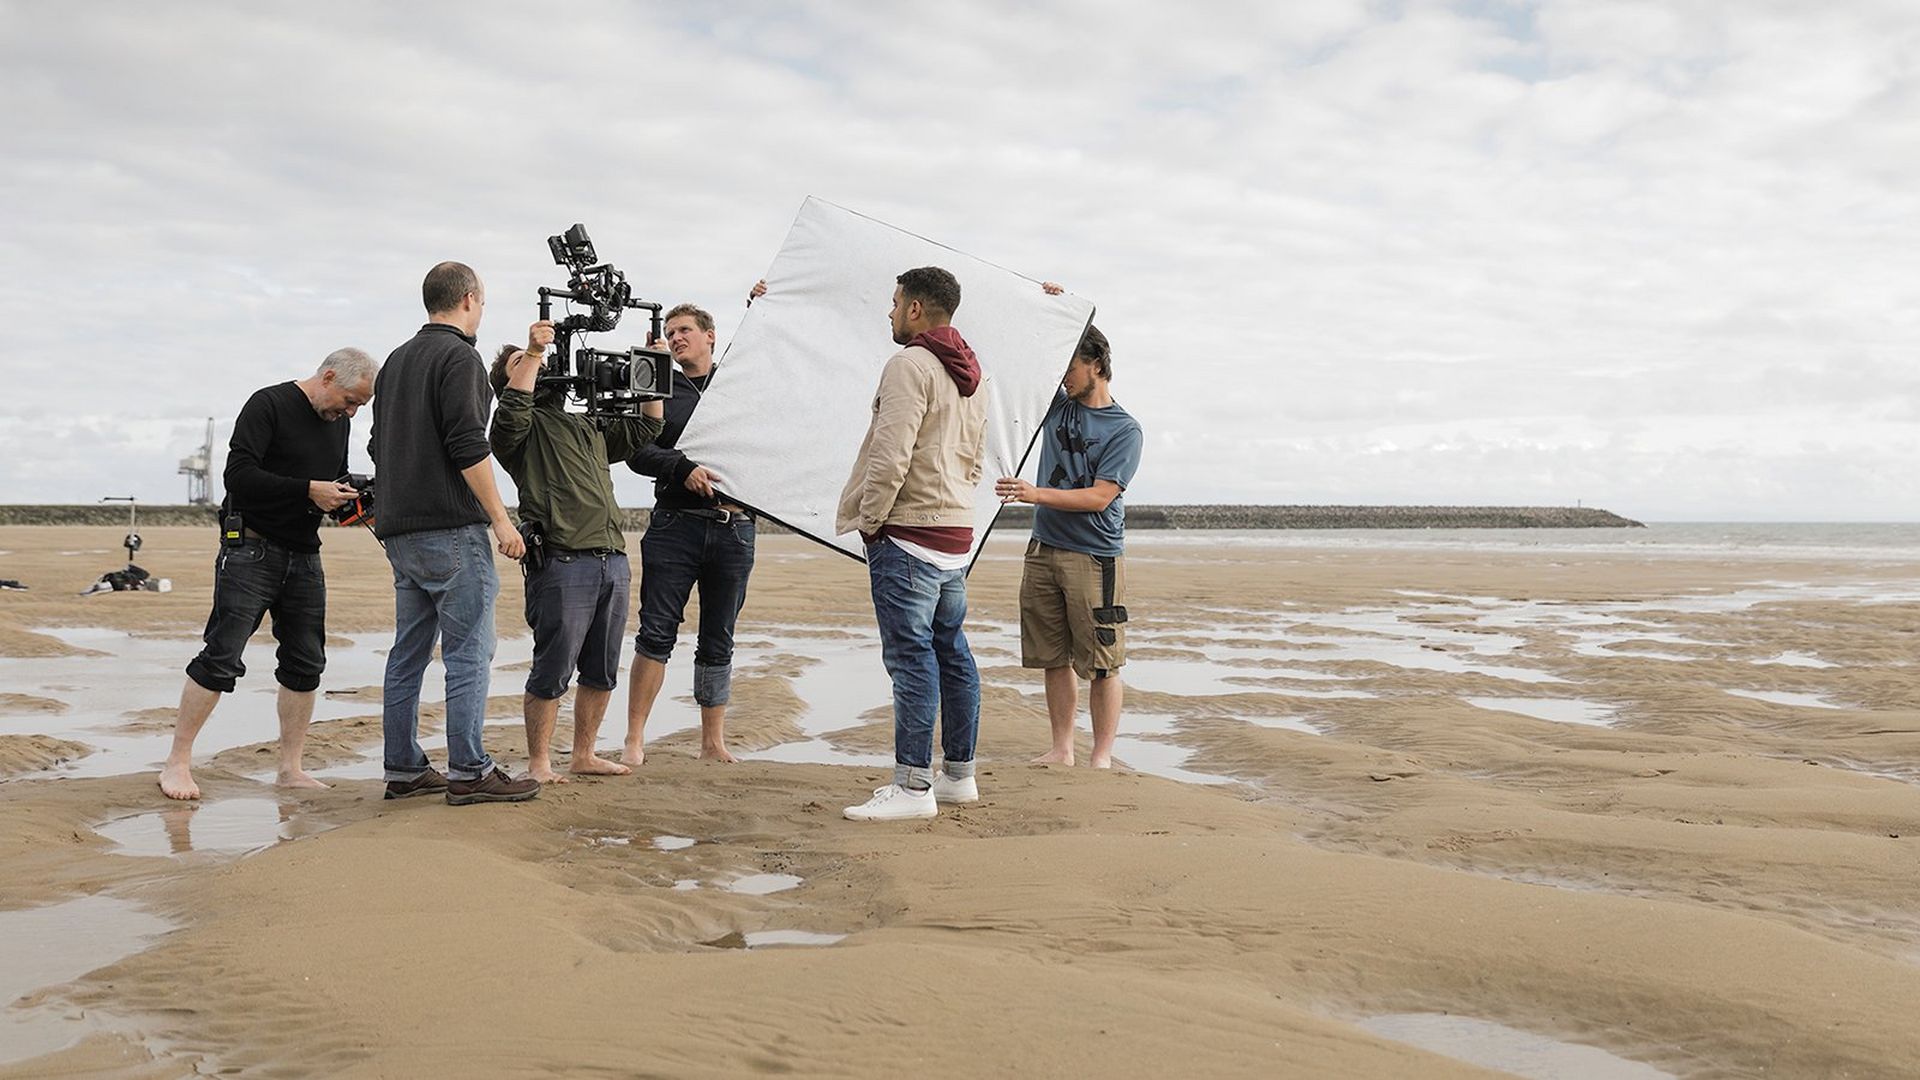 Filming with the ֽ_격- on a beach